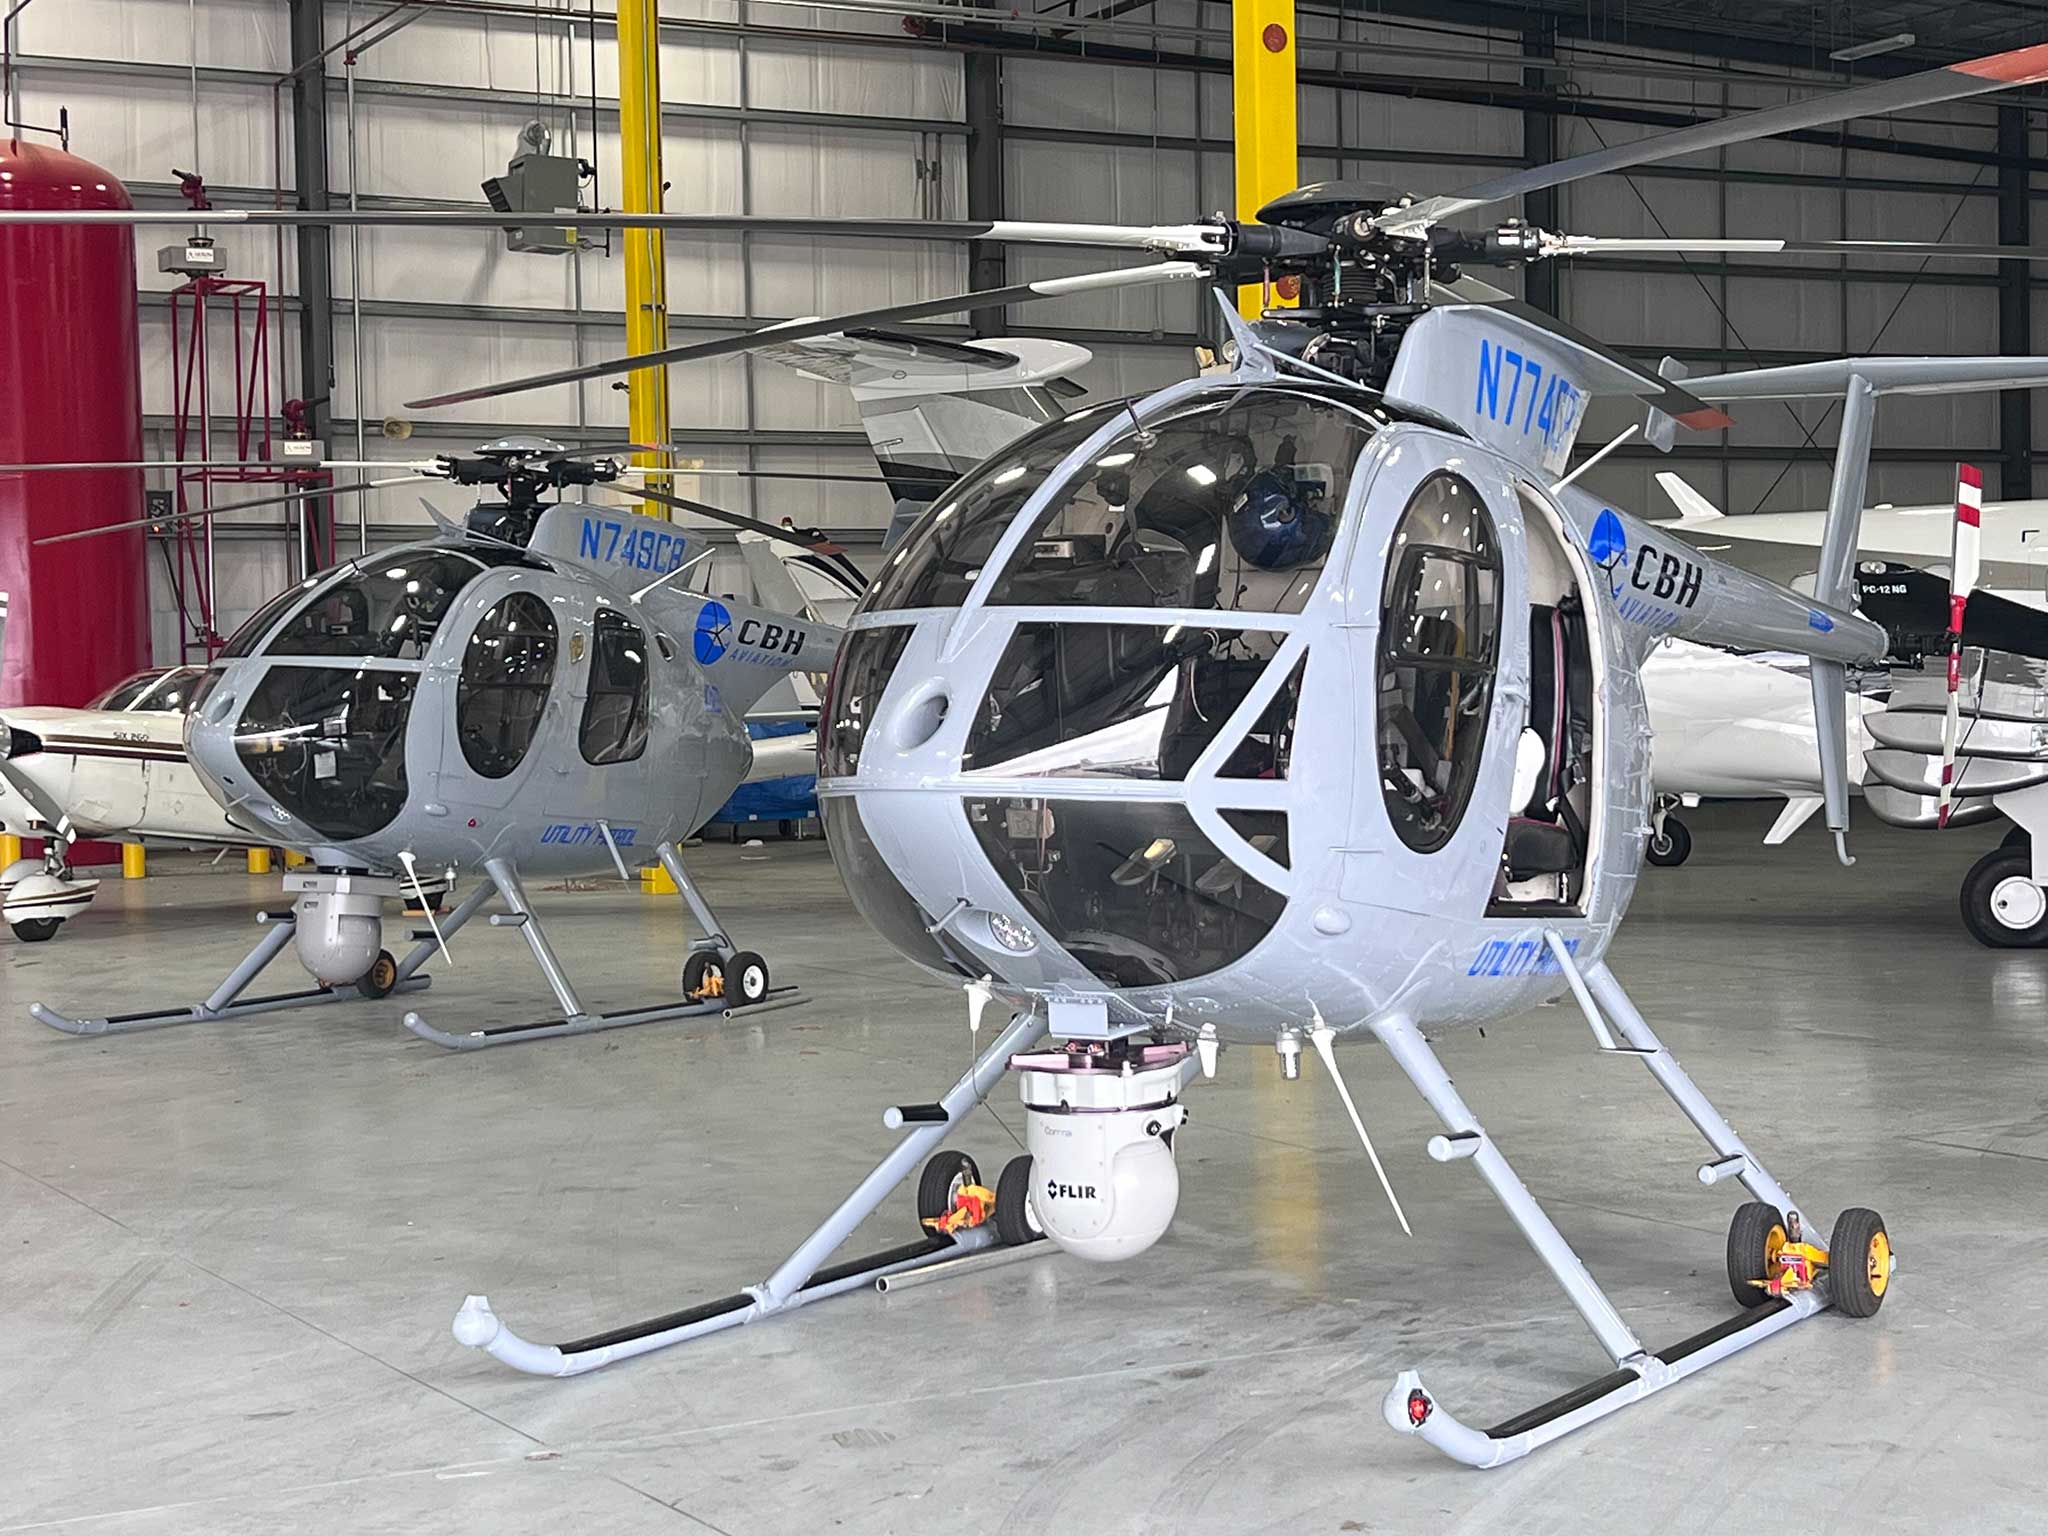 CBH Aviation Helicopters sitting in the hangar